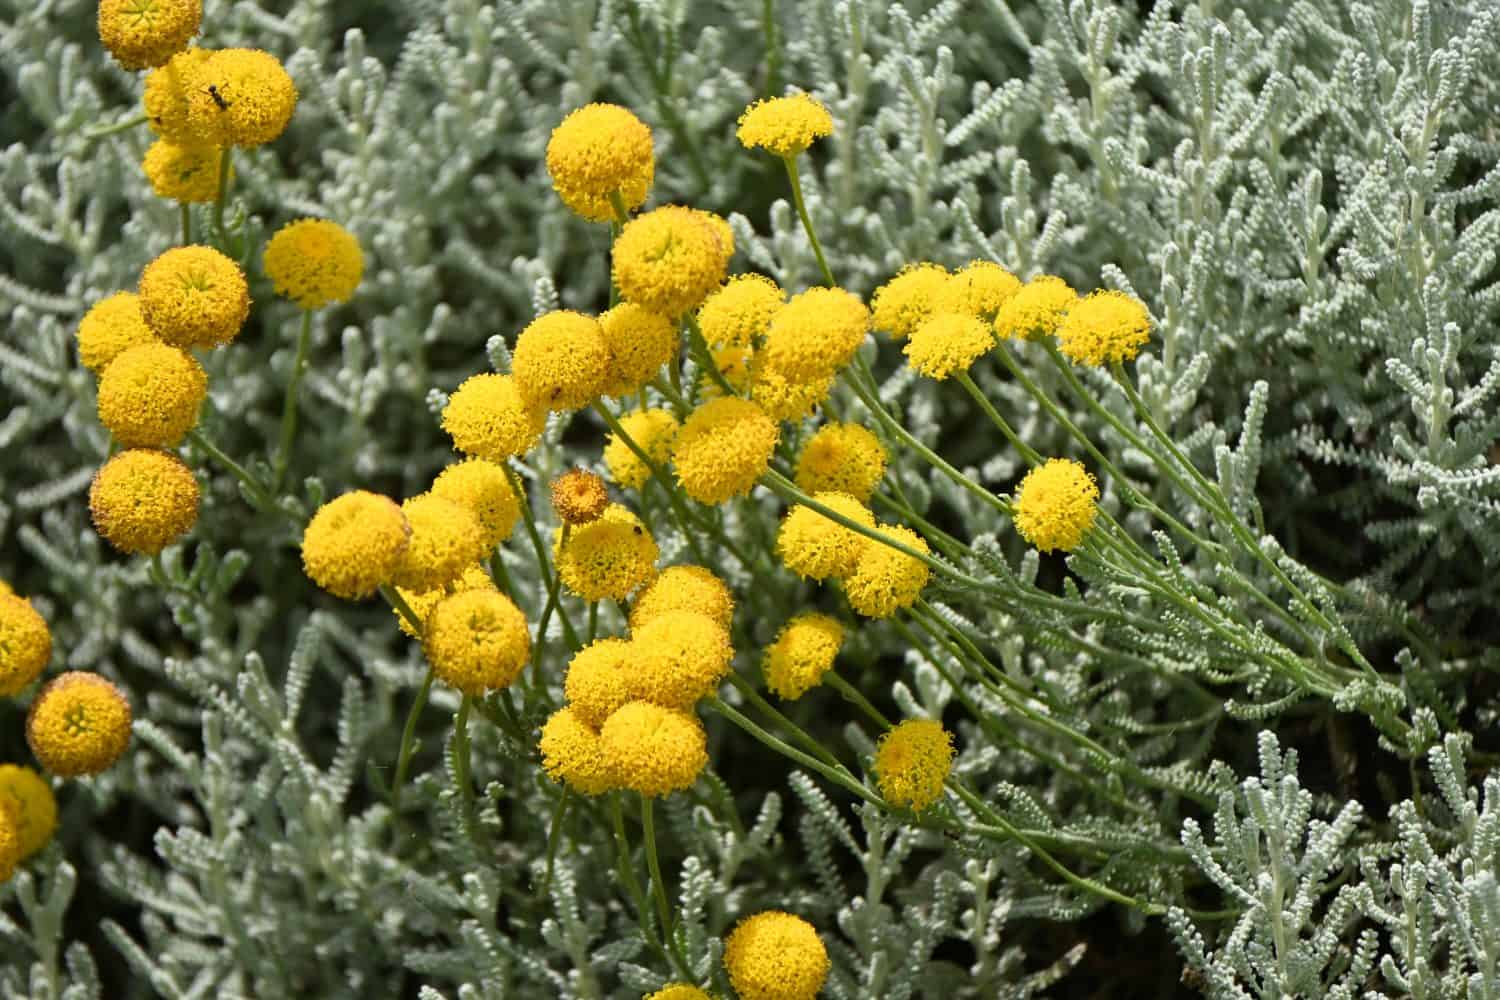 Santolina ( Cotton lavender ) flowers. Asteraceae evergreen shrub herb. Blooms from May to July.